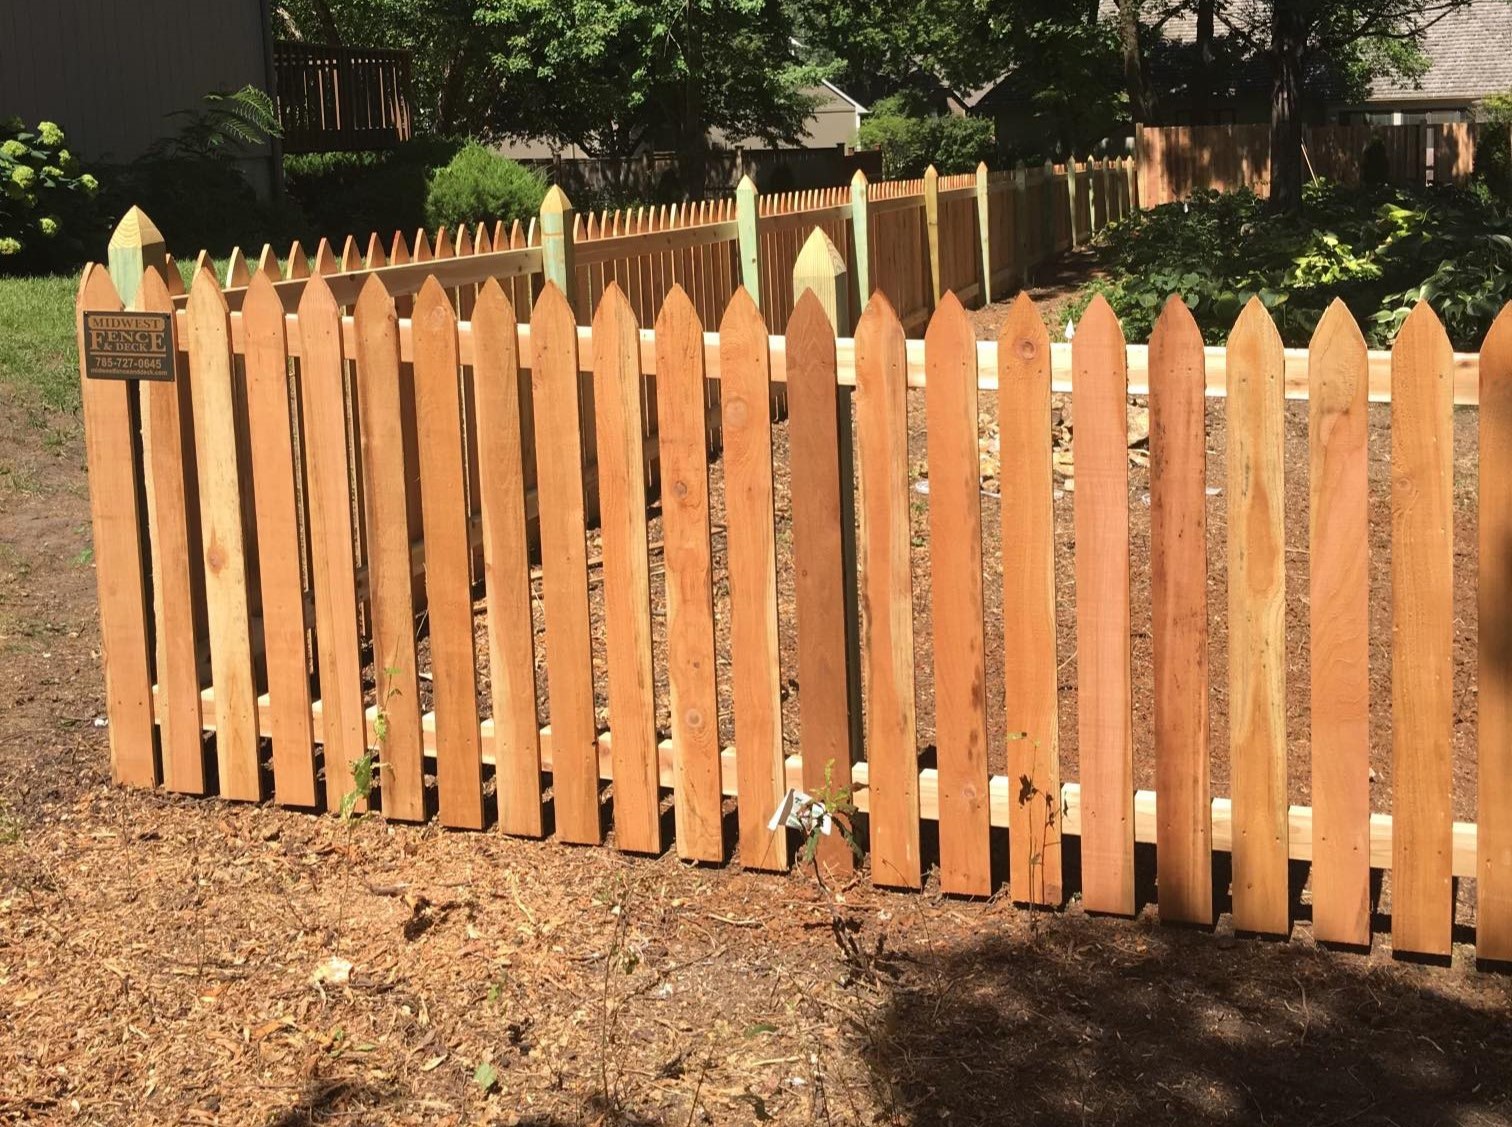 wood picket fence going up hill while remaining straight